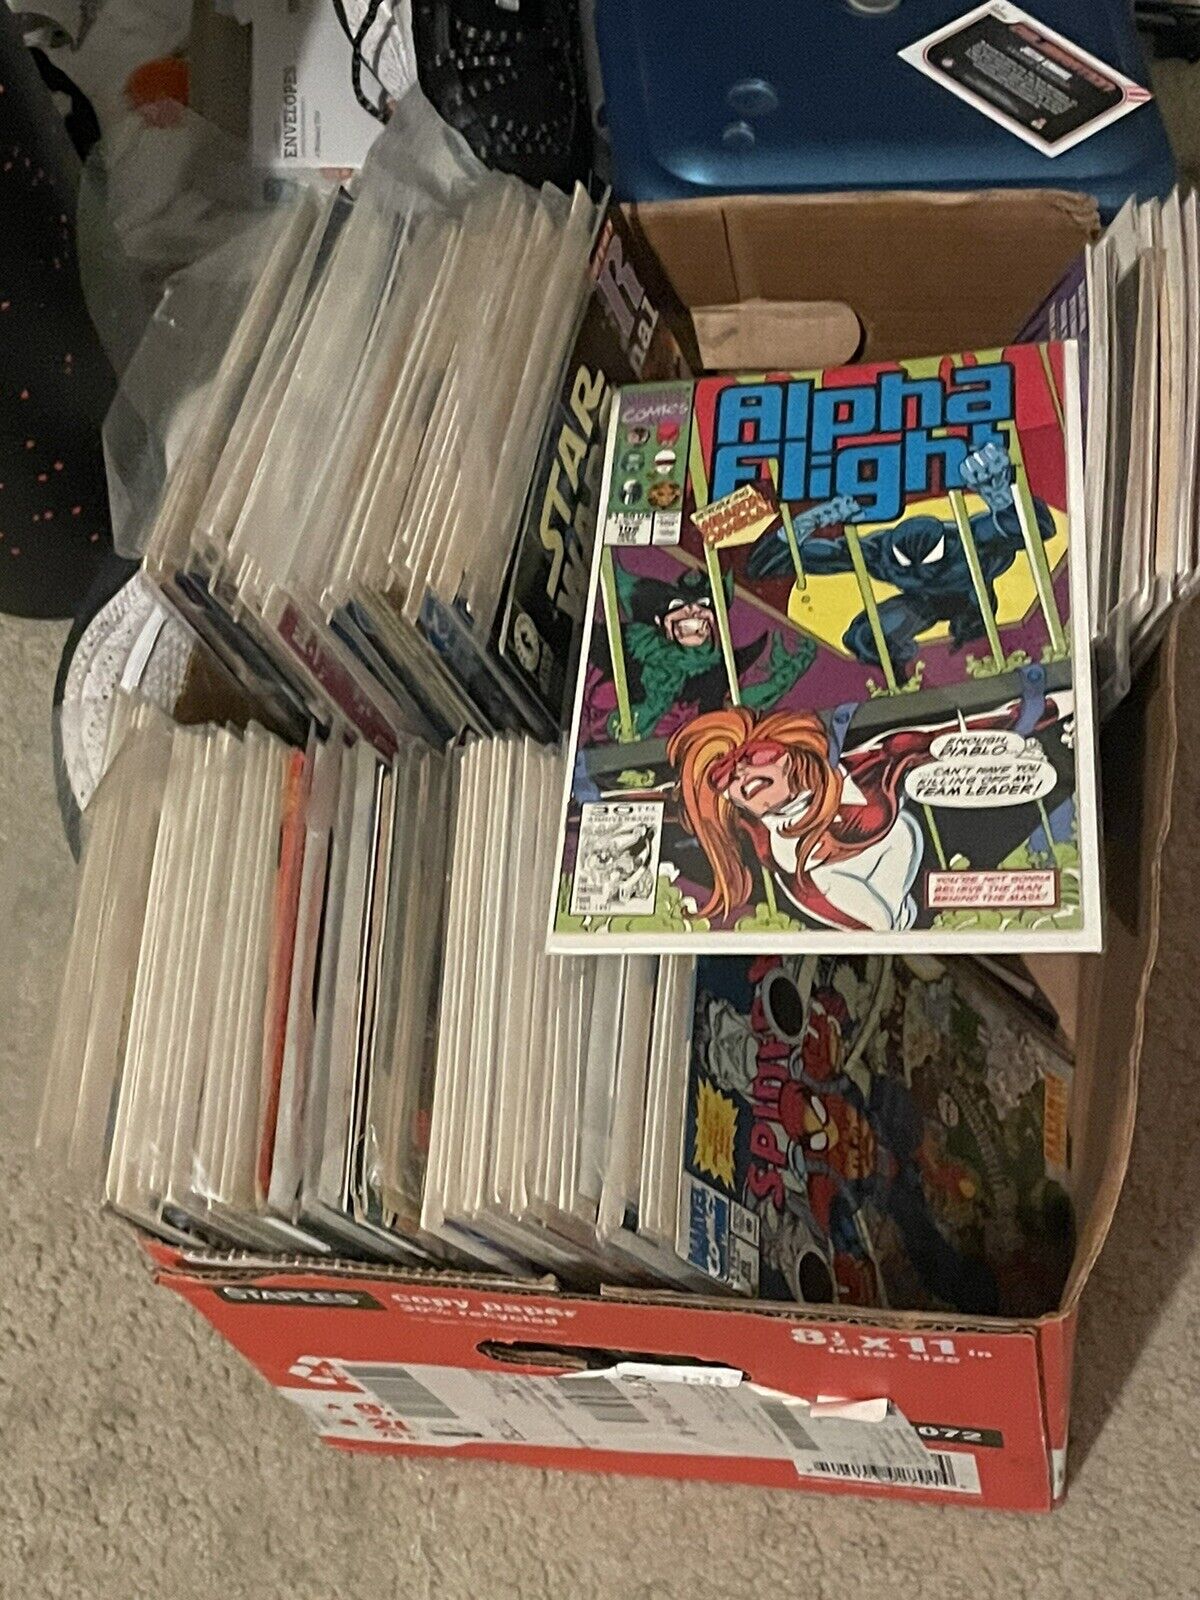 Lot Of Comics 100 Plus Any Questions Please Ask Most Are Worth 5 Each